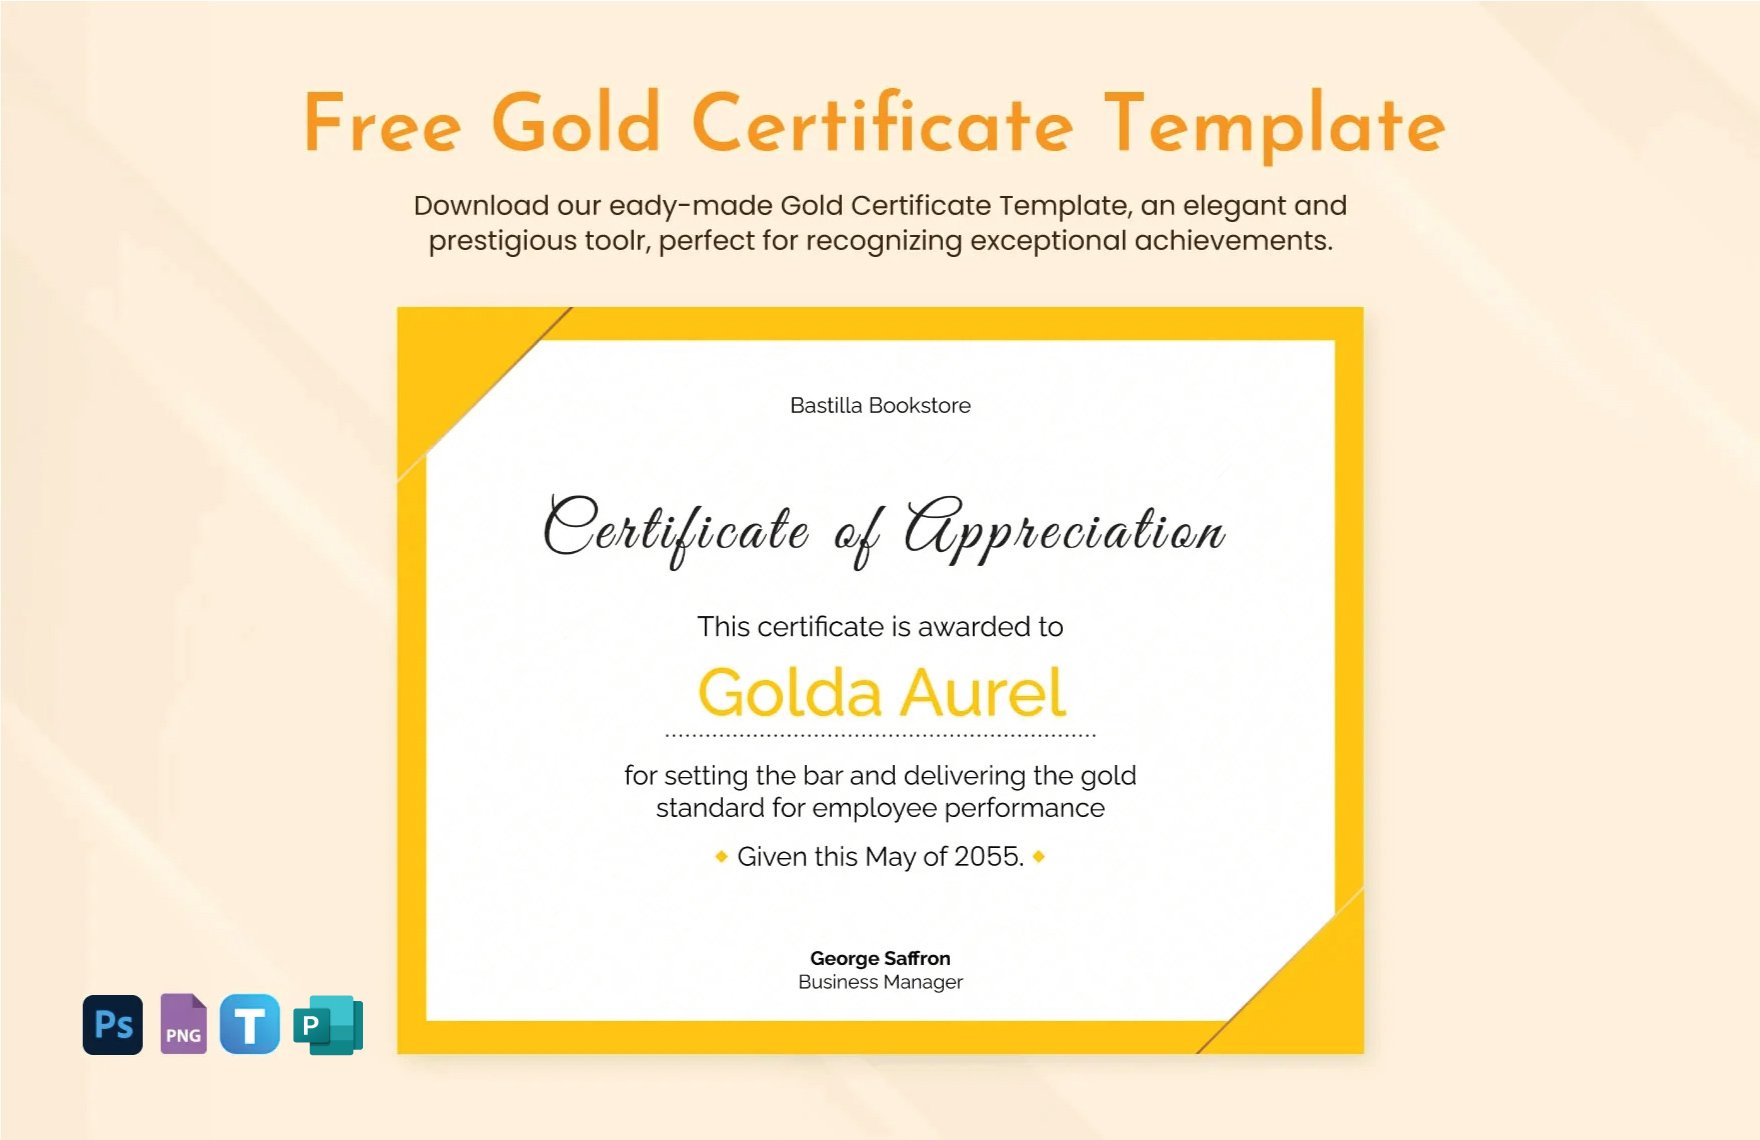 Free Gold Certificate Template